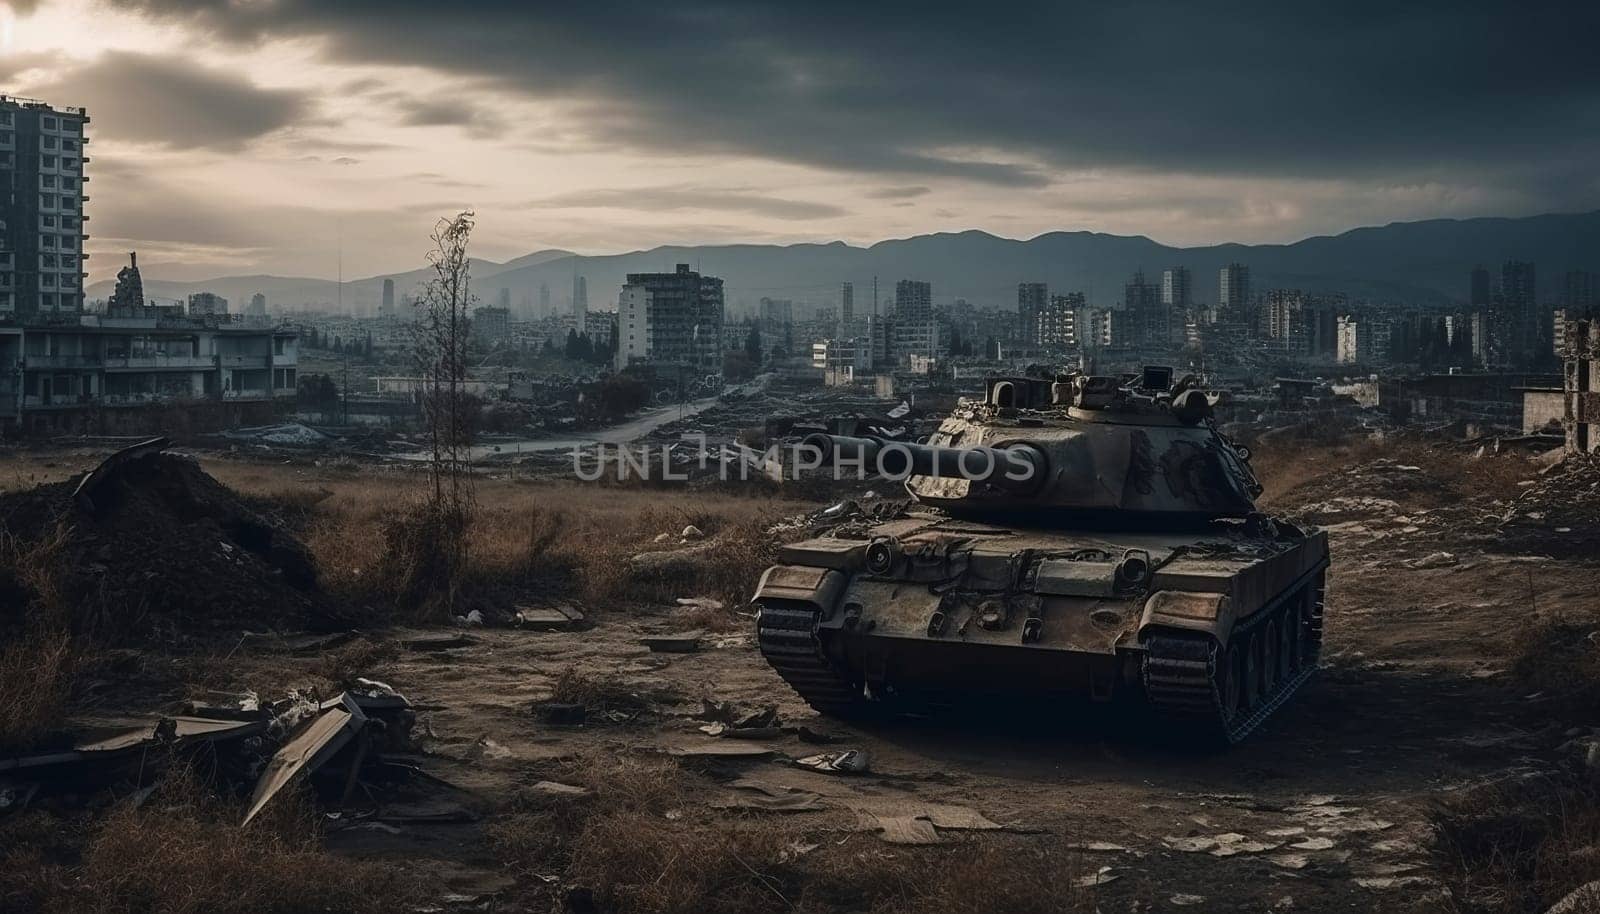 A military tank against the background of a ruined city 4k